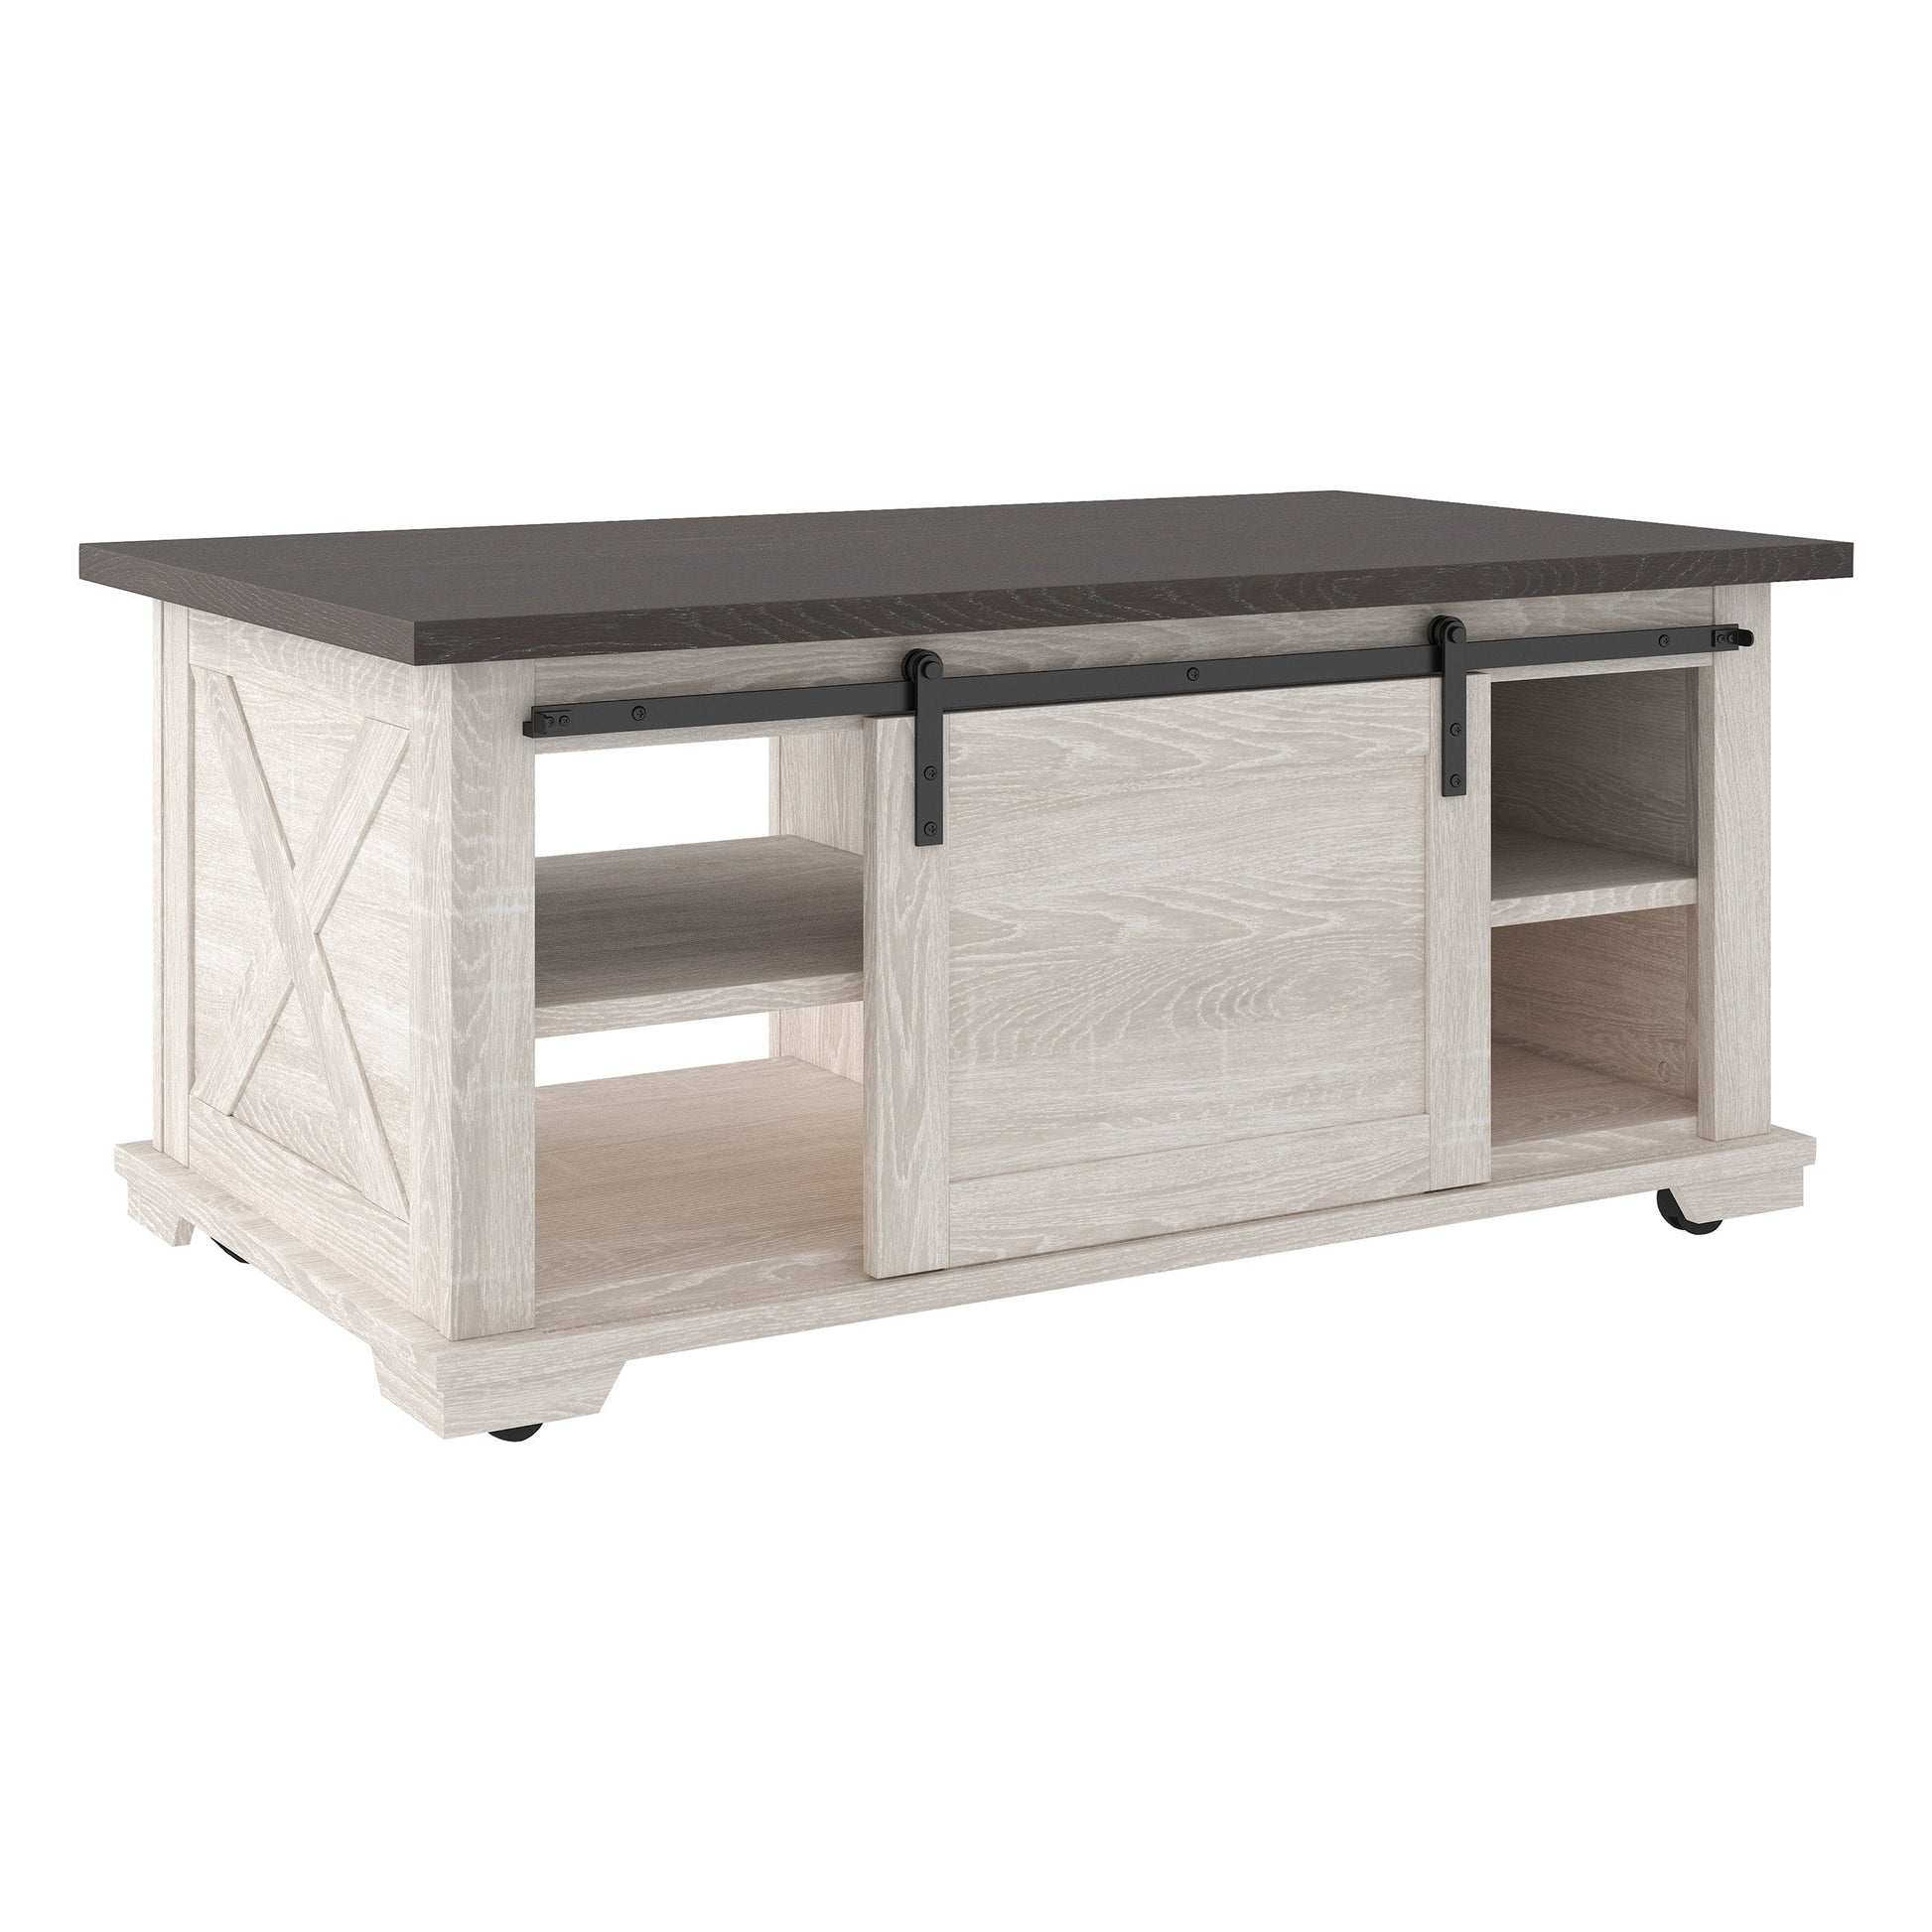 Two Tone Gray/Antique White Contemporary Lift Top Storage Rectangular Cocktail Table